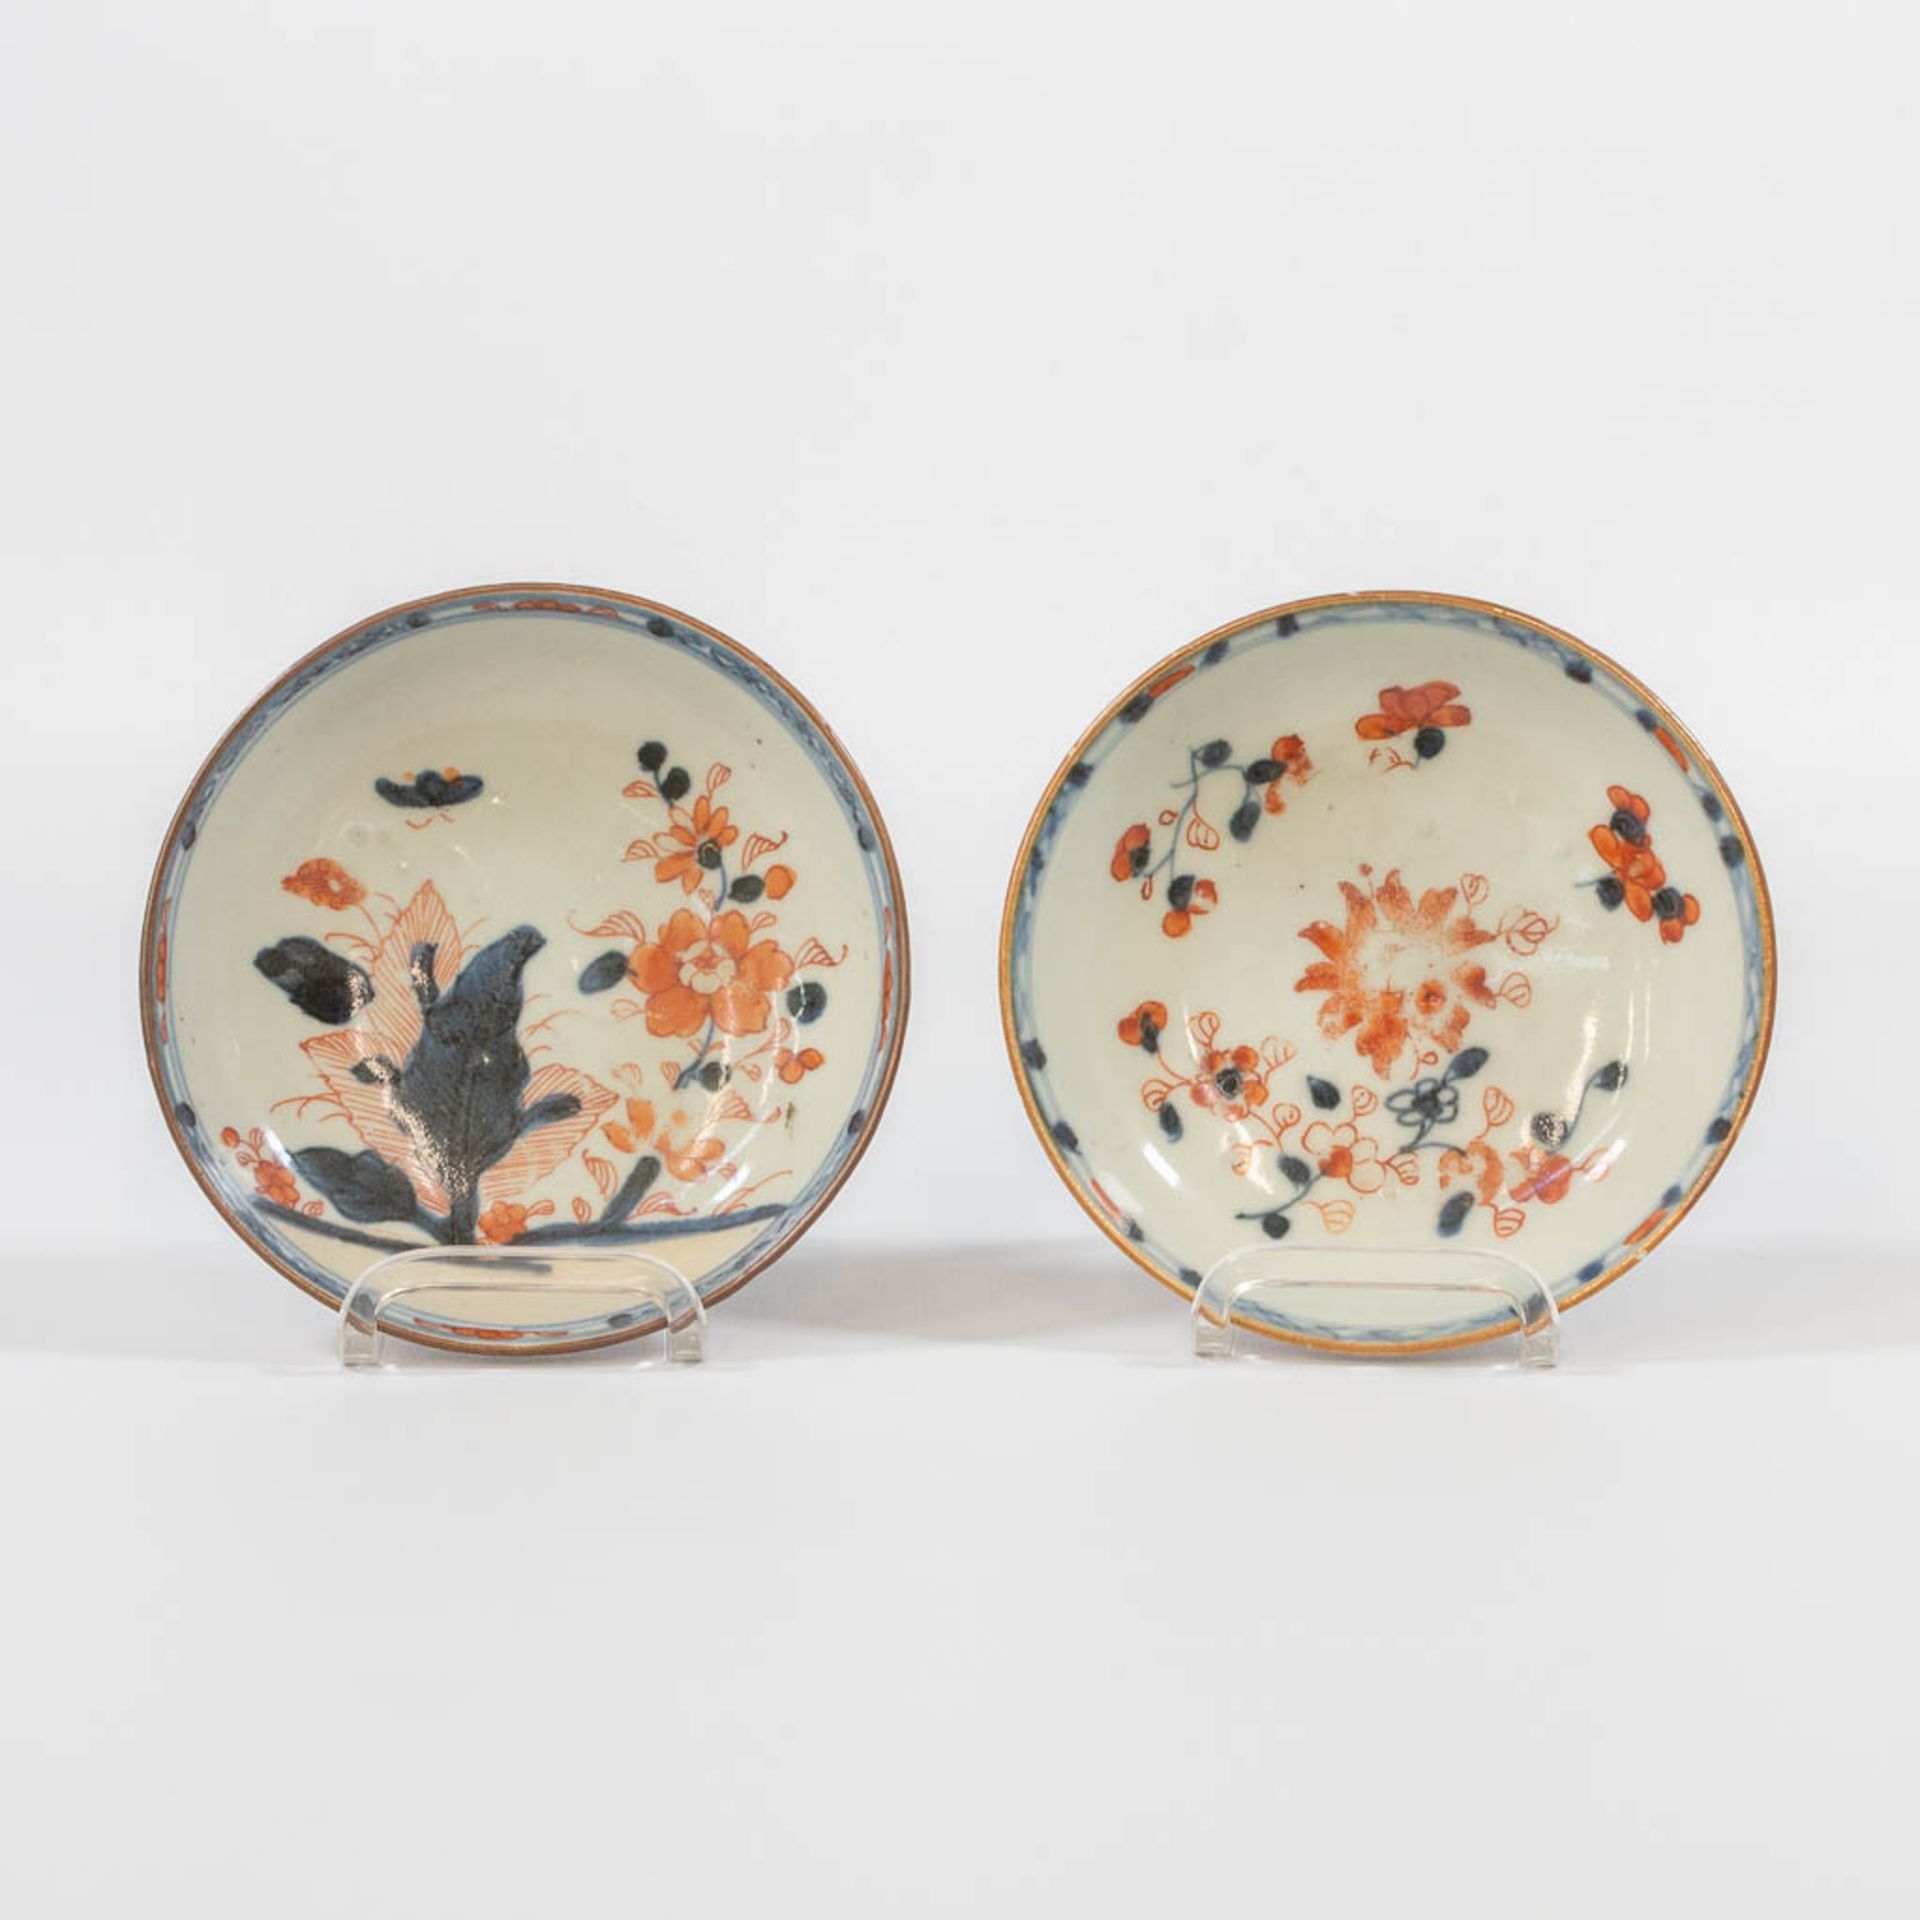 A collection of 12 Capucine Chinese porcelain items, consisting of 5 plates and 7 cups. - Image 22 of 26